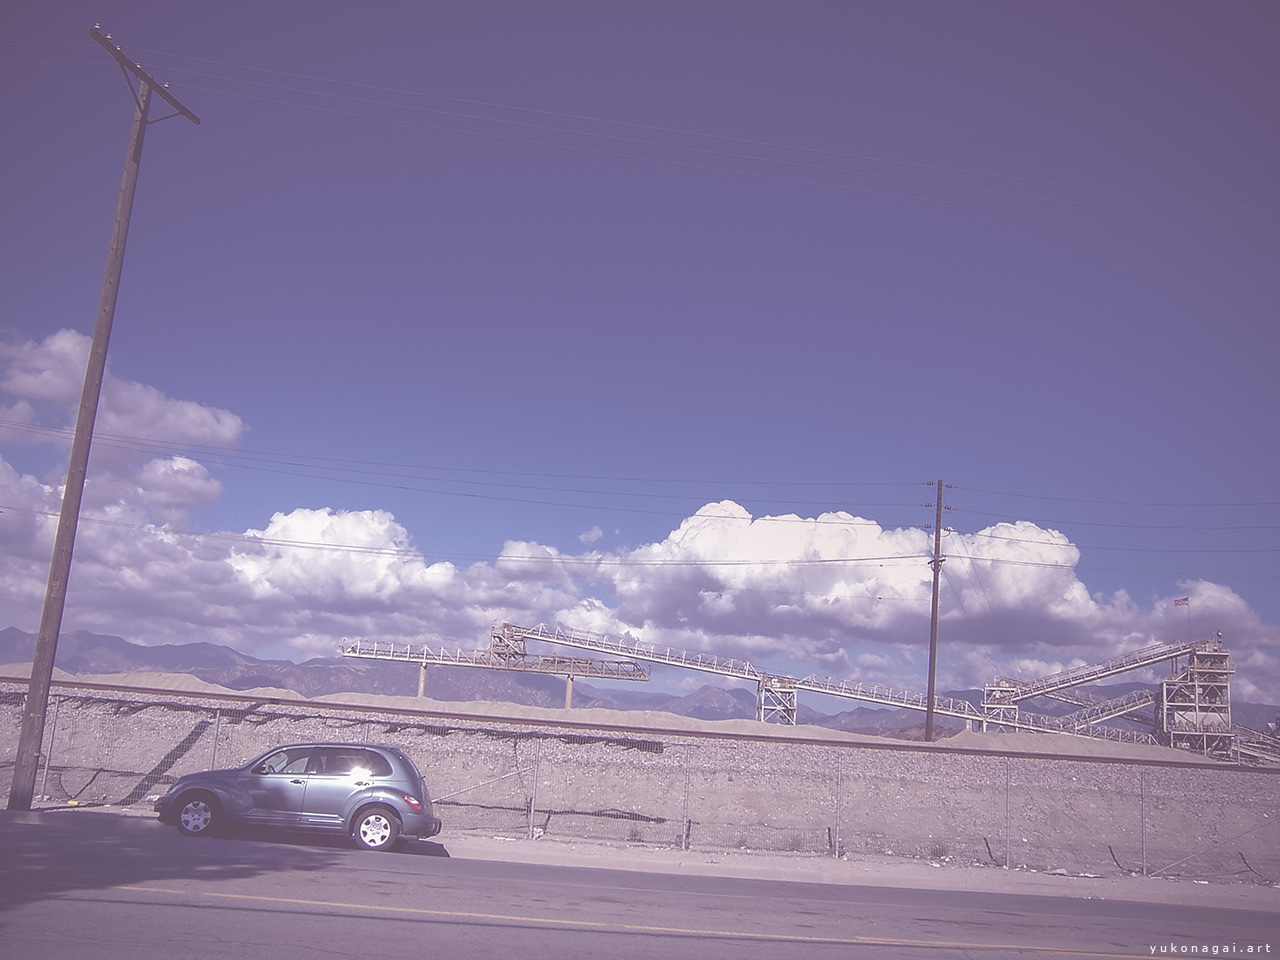 A silver car parked with mountains, clouds and concrete factory in background.